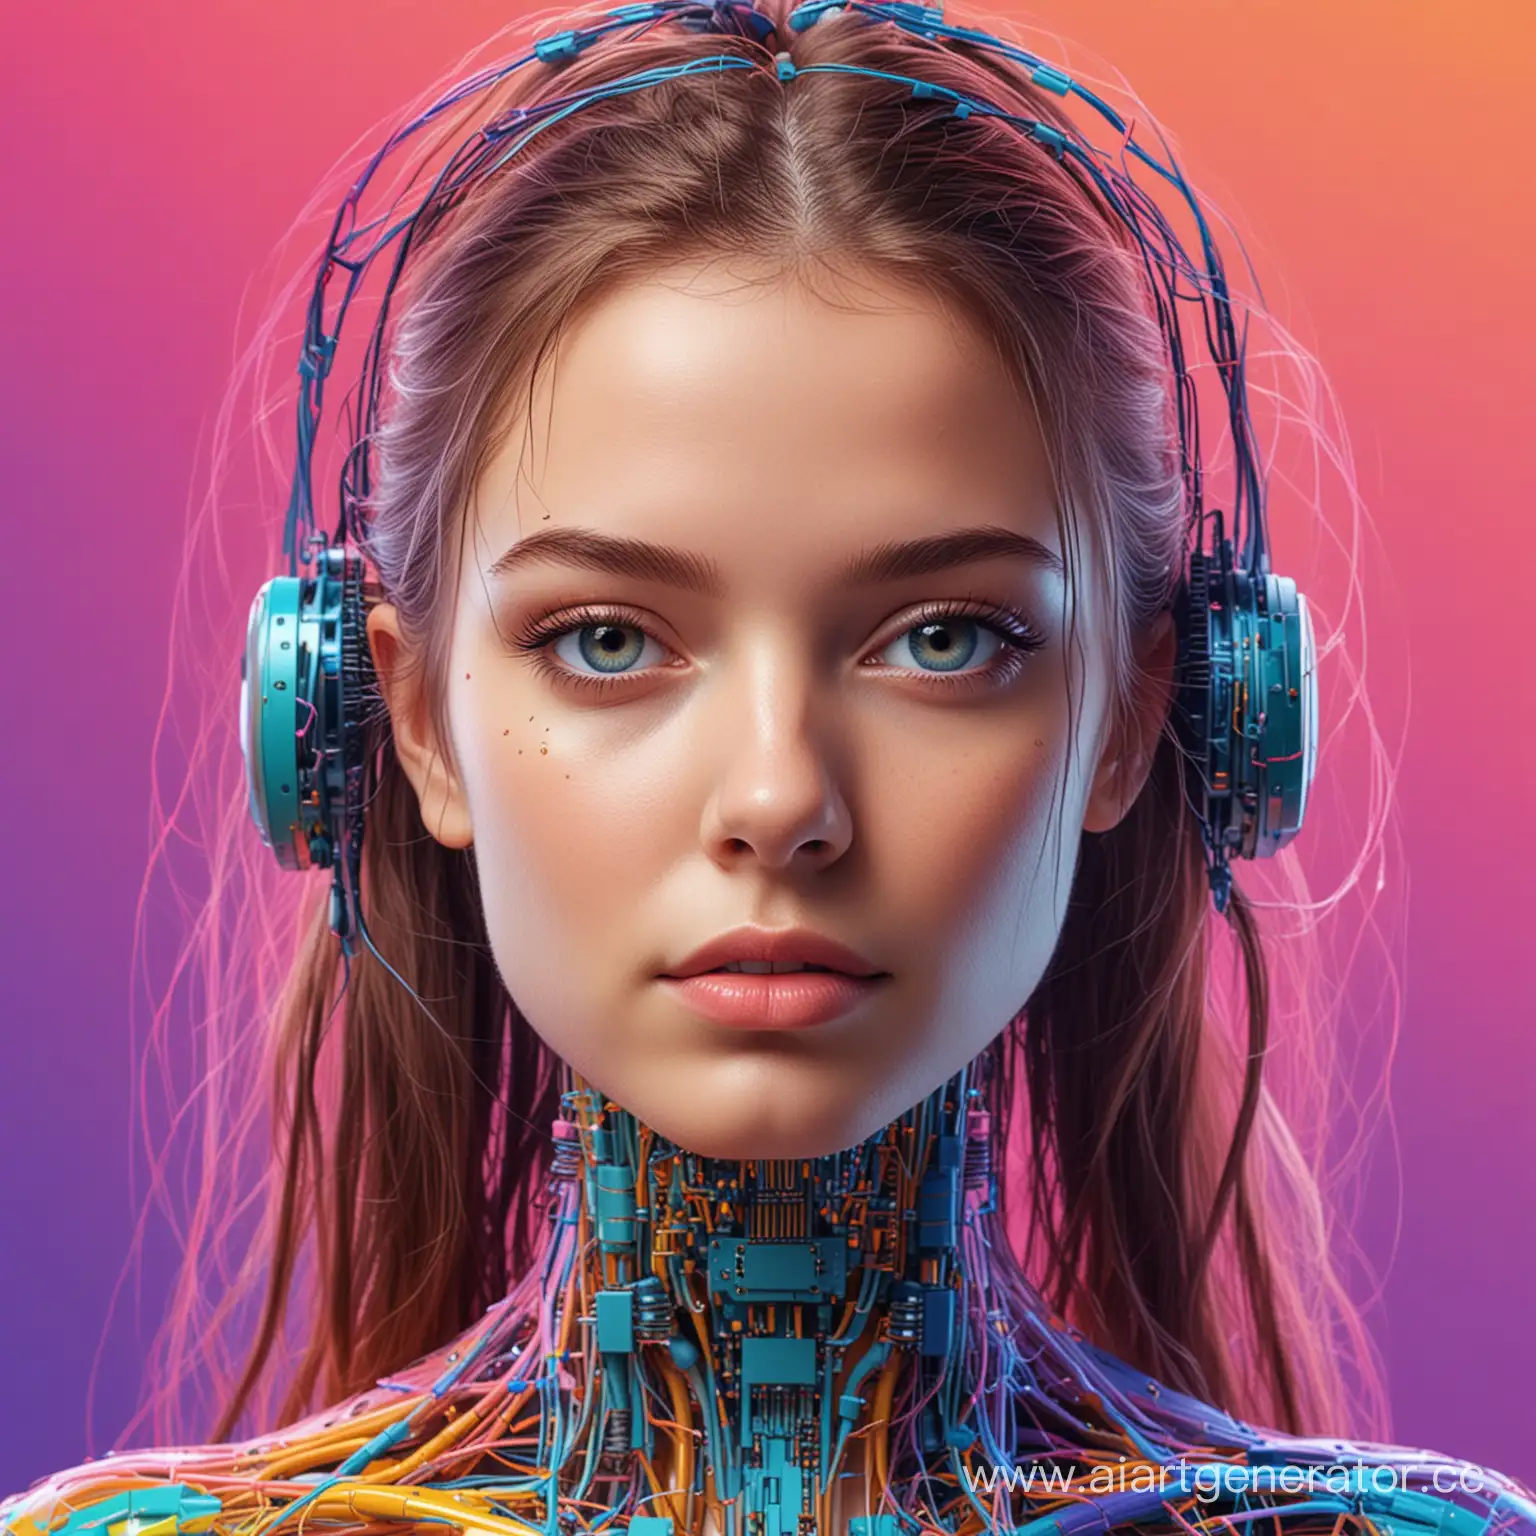 BrightColored-Neural-Network-Webinar-Poster-Realistic-Image-of-Girl-with-AI